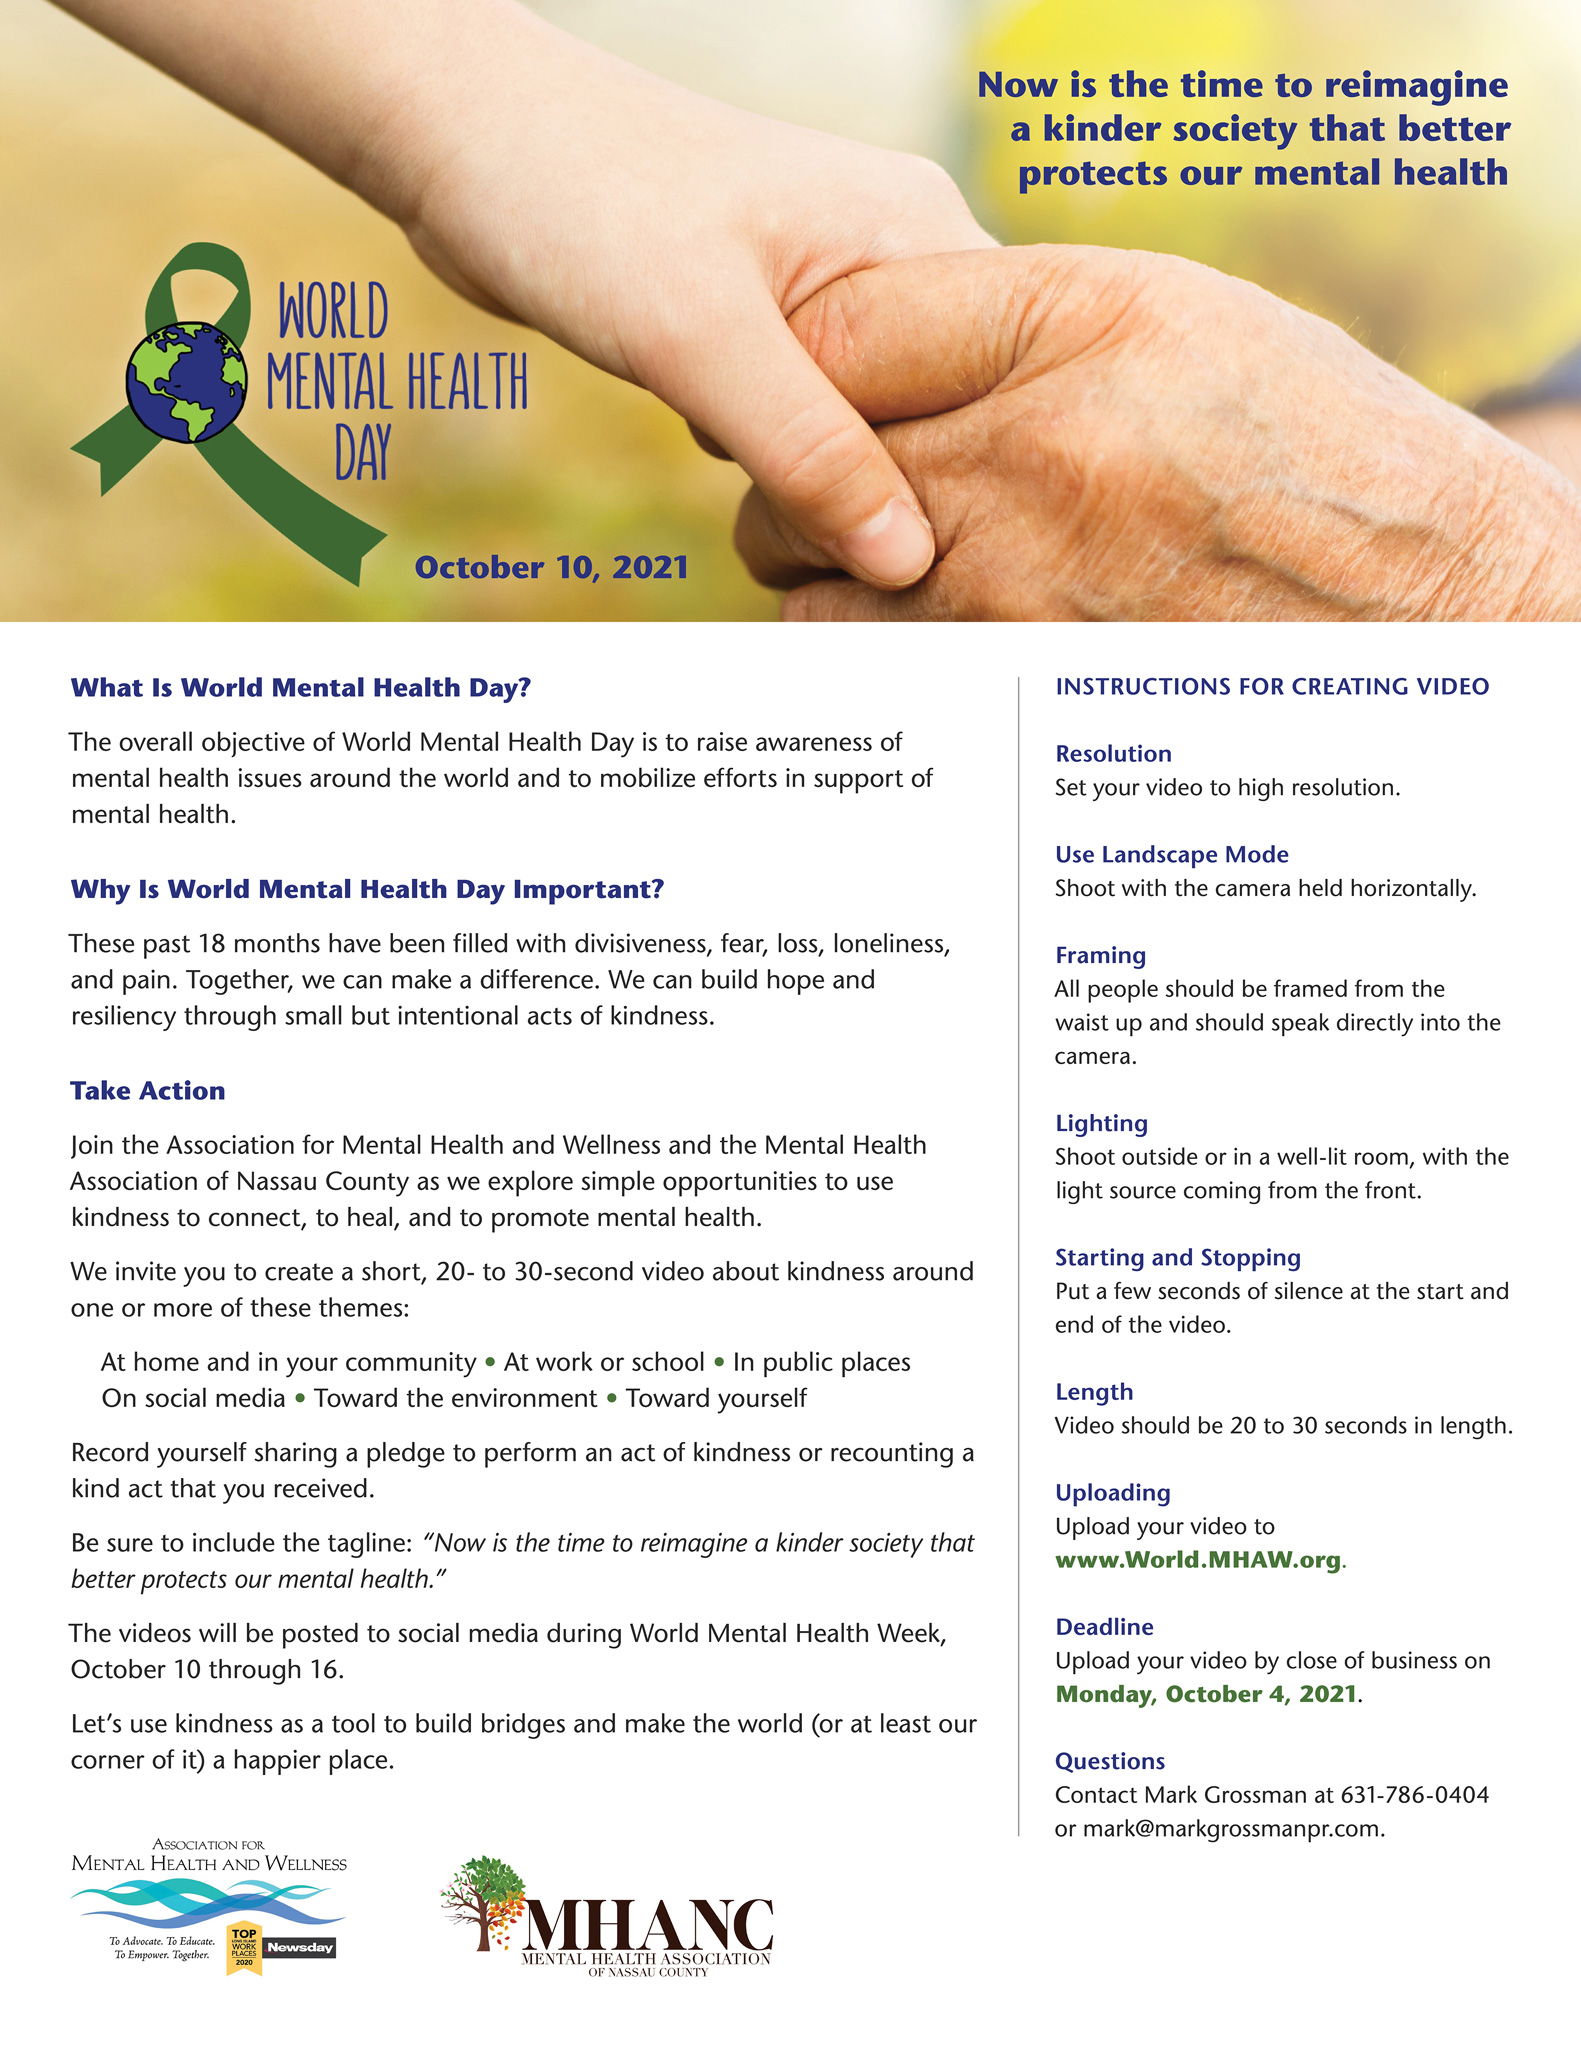 Flyer describing World Mental Health Day and soliciting videos on the subject of kindness. Across the top is an image of a young person's hand holding an elder's hand in an outdoor setting, as well as the logo for World Mental Health Day. Text follows. At the bottom are logos for the Association for Mental Health and Wellness and the Mental Health Association of Nassau County.